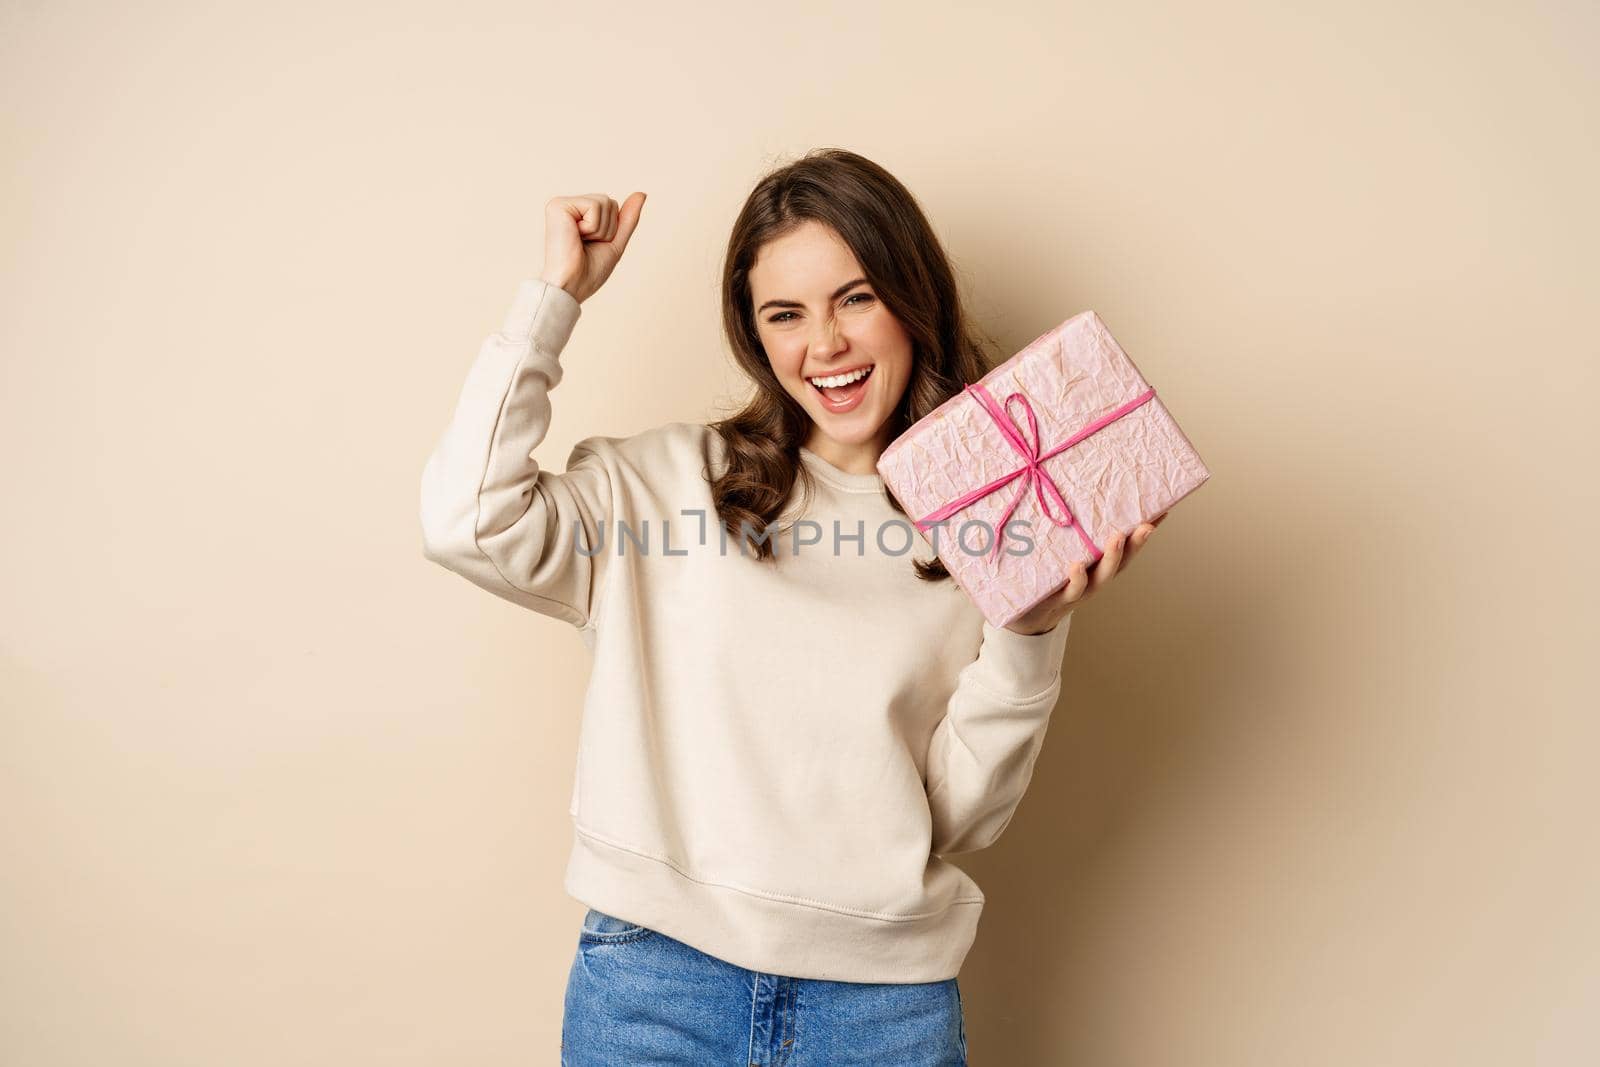 Happy smiling woman holding gift and triumphing, raising hand up joyfully, receive present on holiday, standing over beige background.